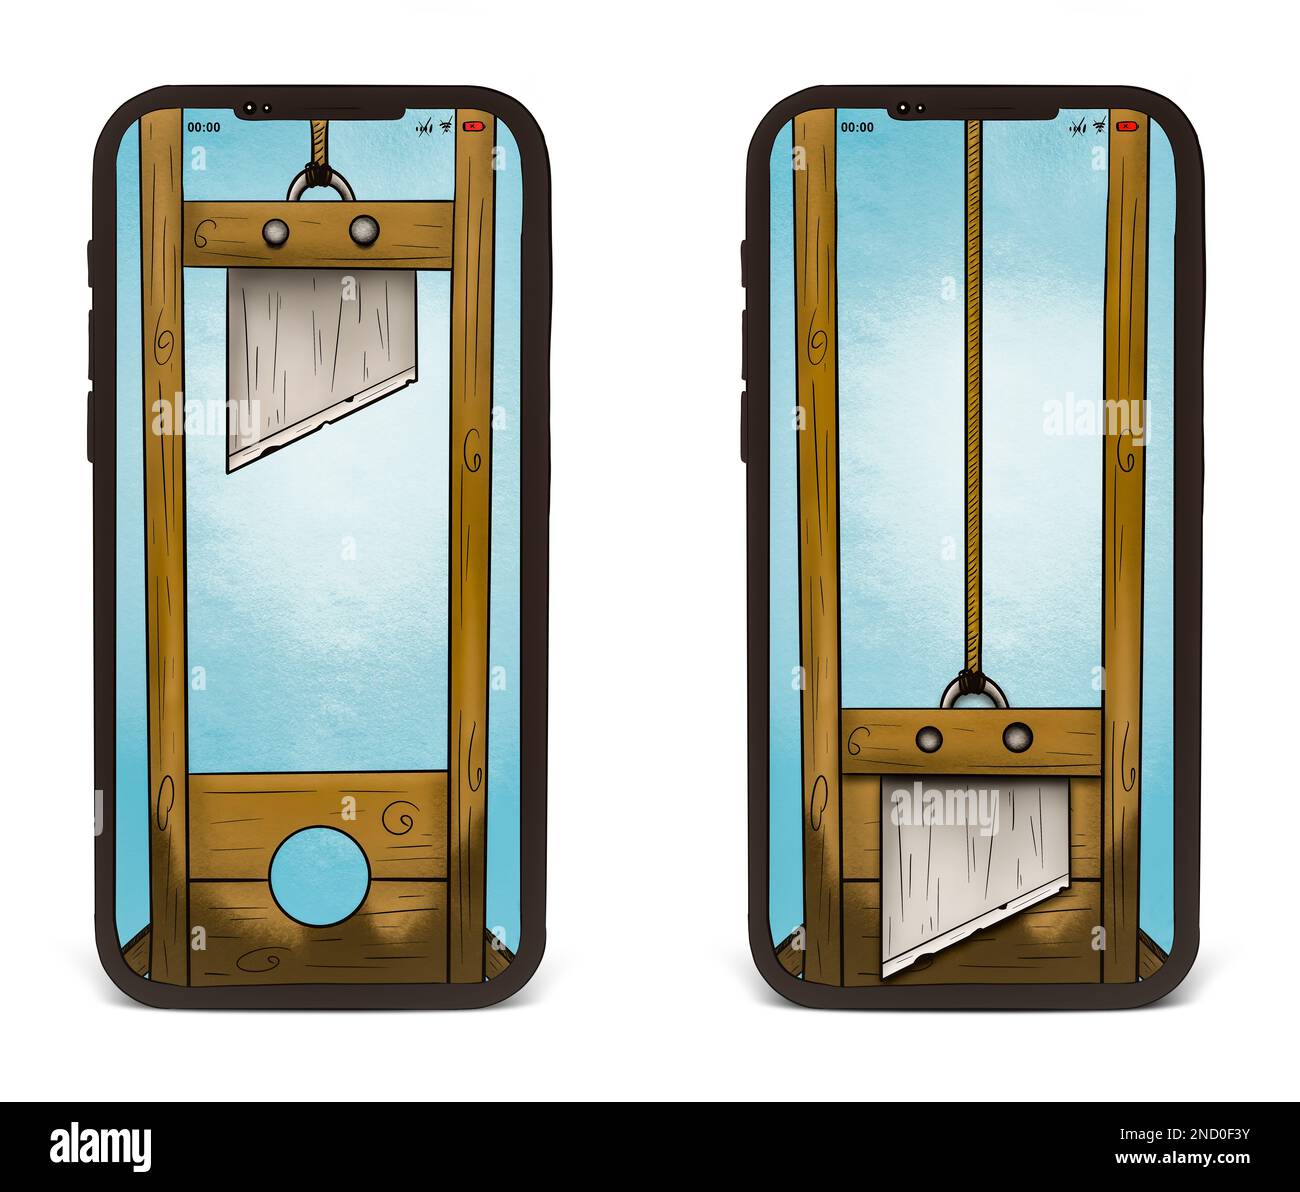 Get hanged. Guillotine. Guillotine used in the late 1700s for get hanged. Cell phone addiction. Digital drawing. Executioner in the Middle Ages. Stock Photo